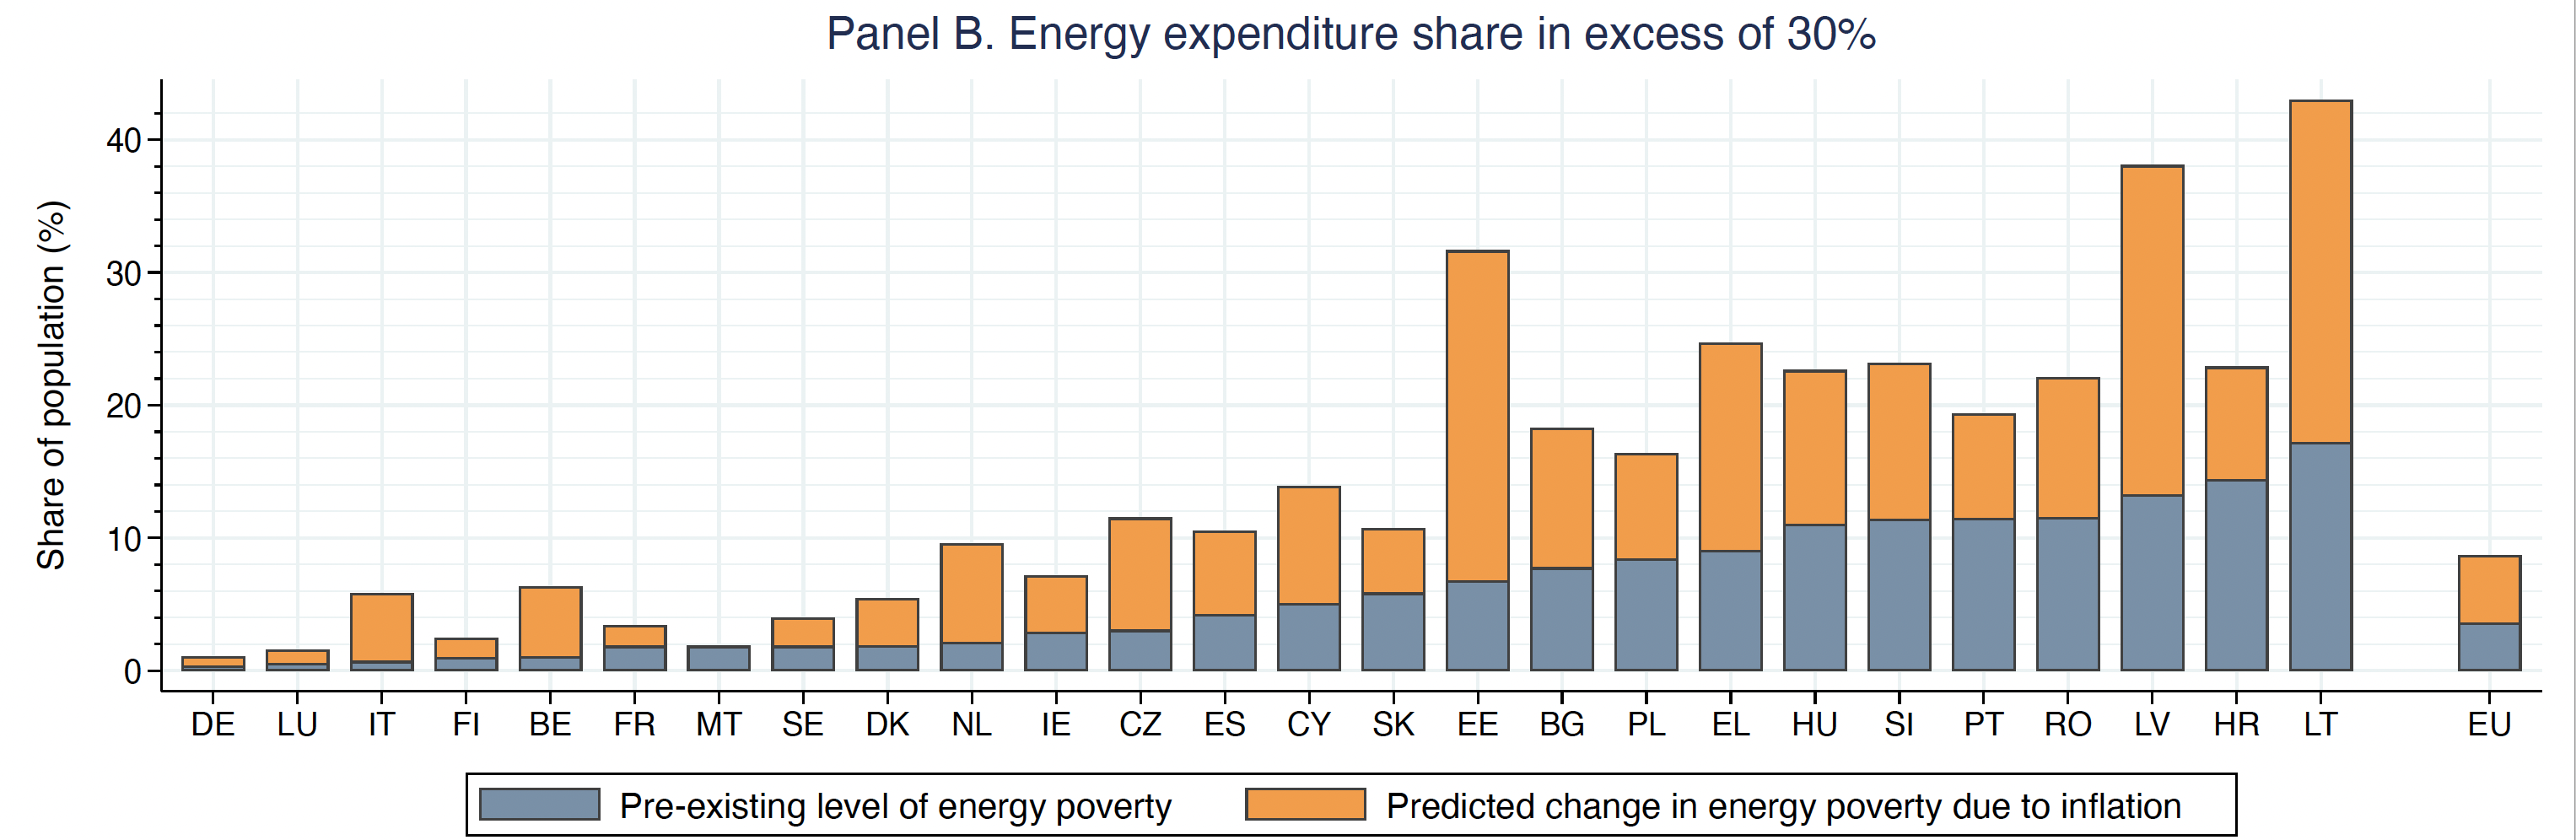 Figure 3b The predicted change in energy poverty indicators due to inflation across the EU